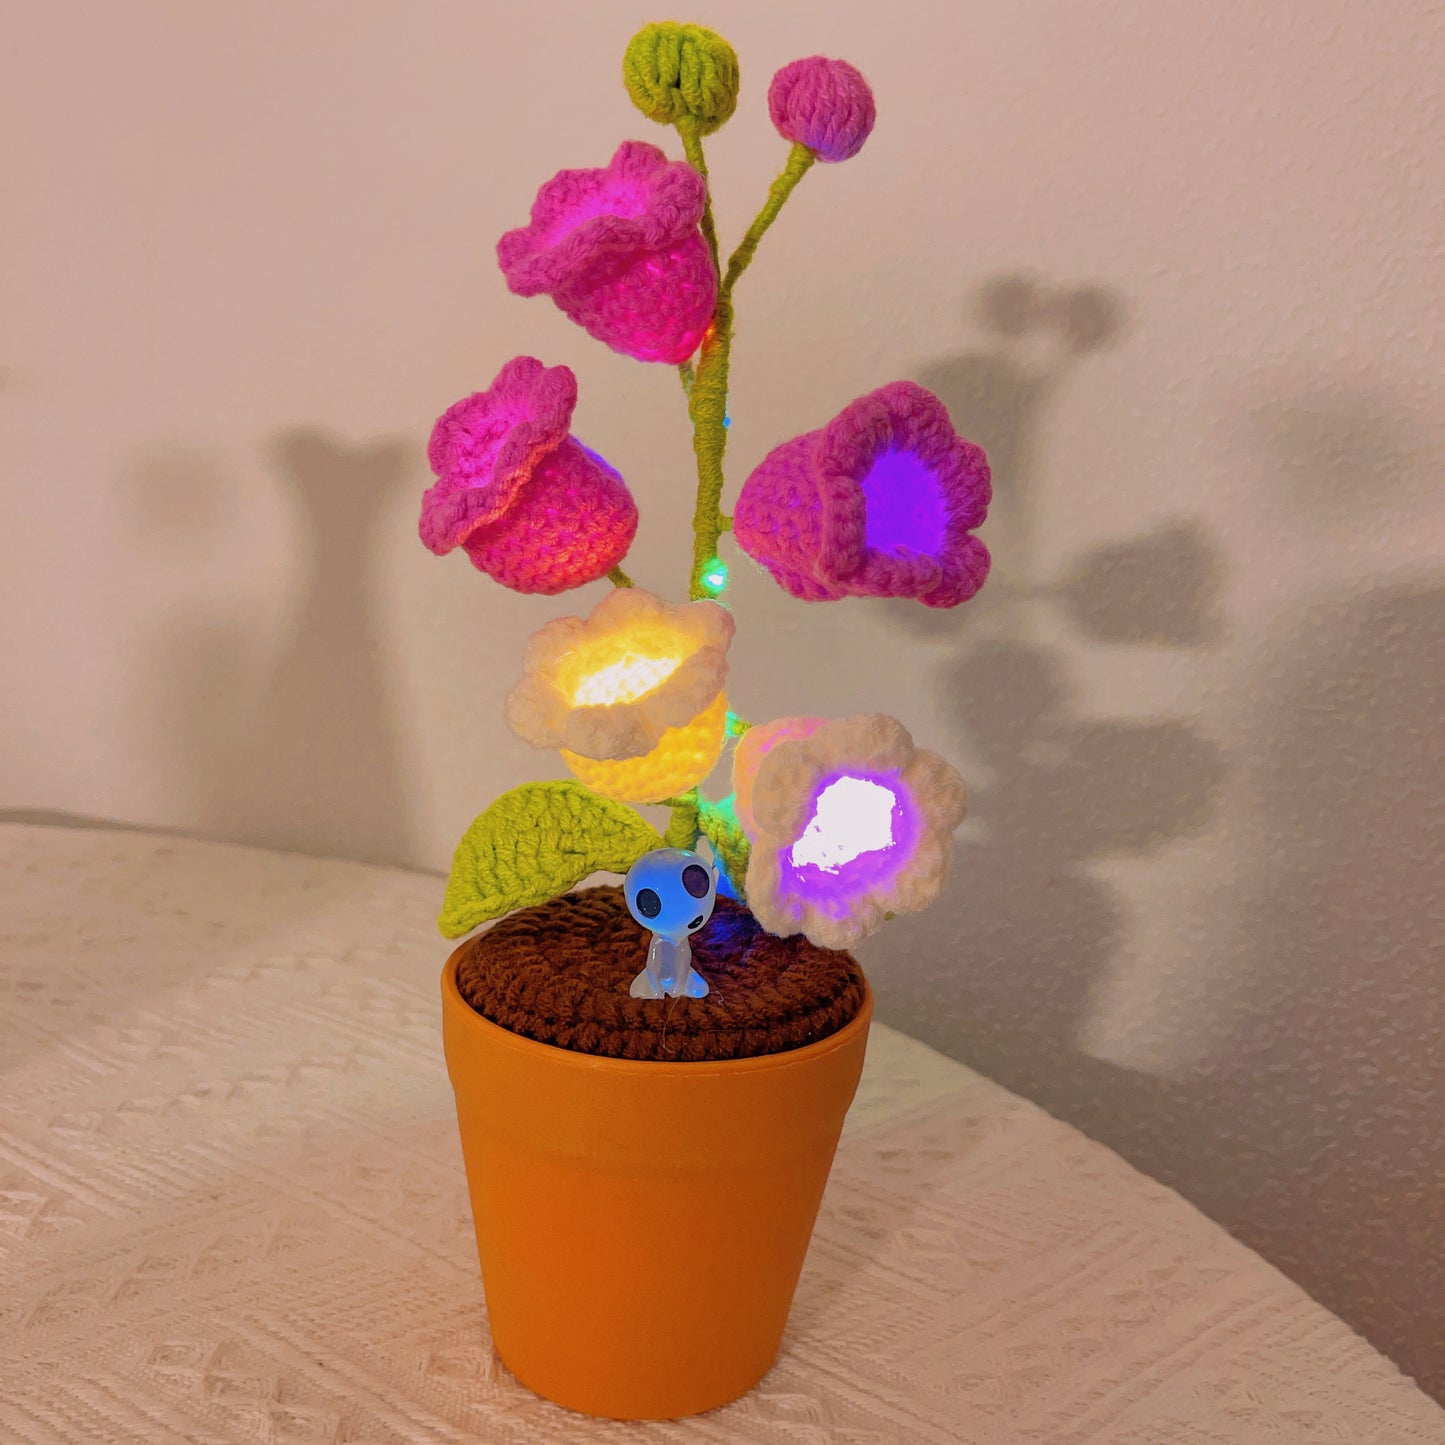 Handmade Crochet Lily of the Valley Plant - Glowing LED Flowers - Unique Home Decor - Perfect Gift for Plant Lovers - Yarn Handcrafted